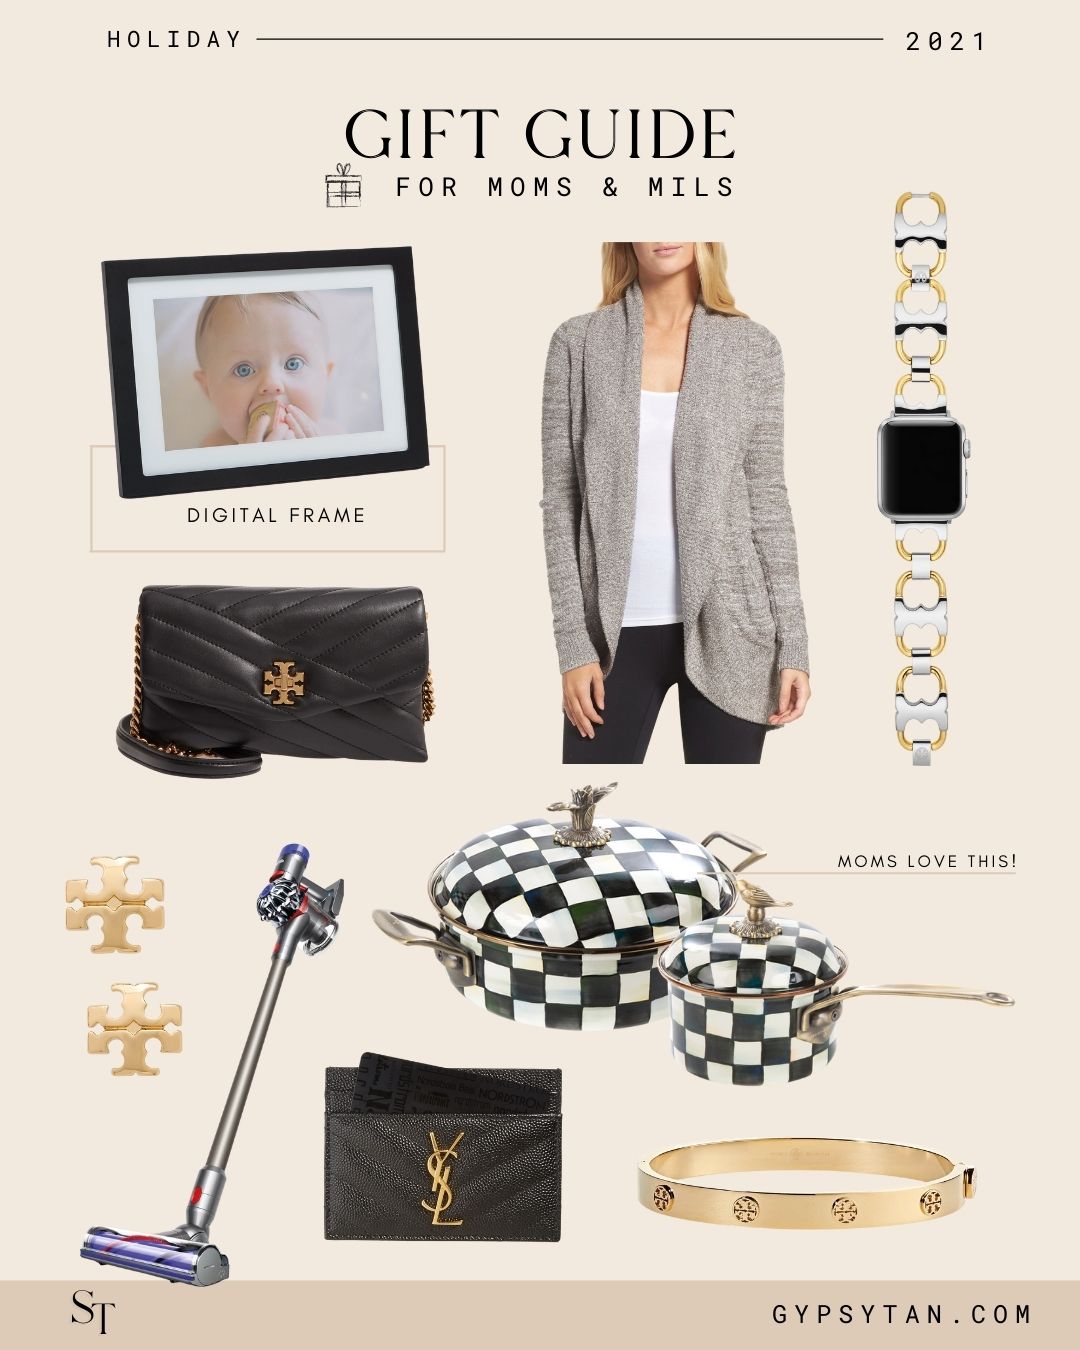 Holiday Gift Guide 2021 - Gifts for Moms